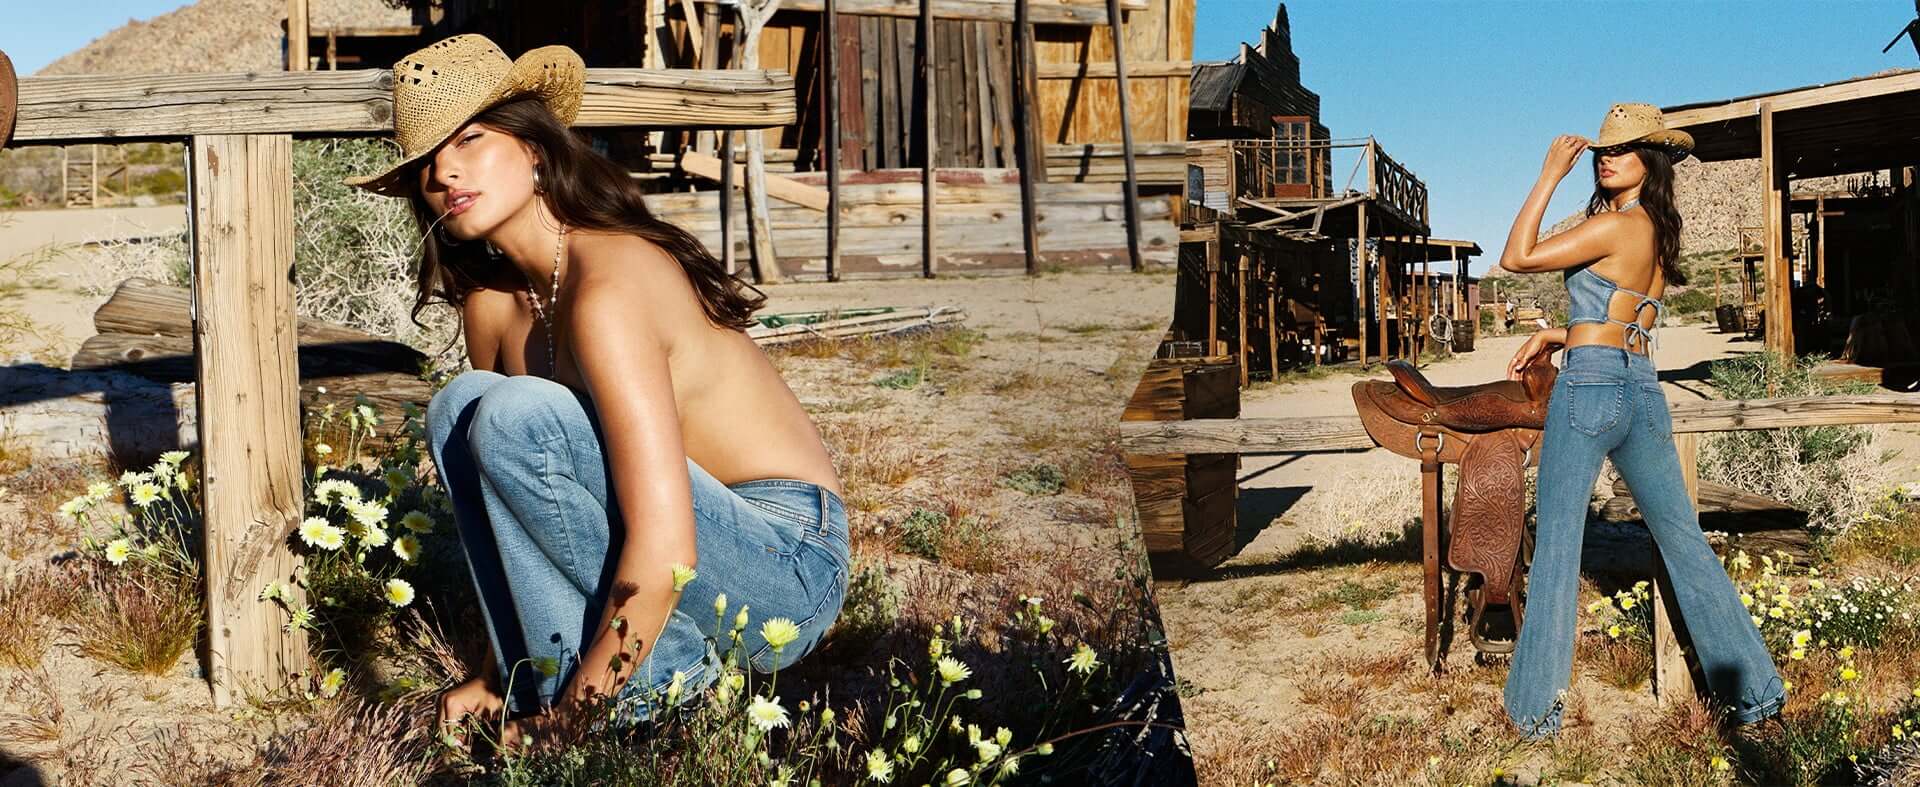 Model kneels down topless, wearing a cowboy hat and jeans.